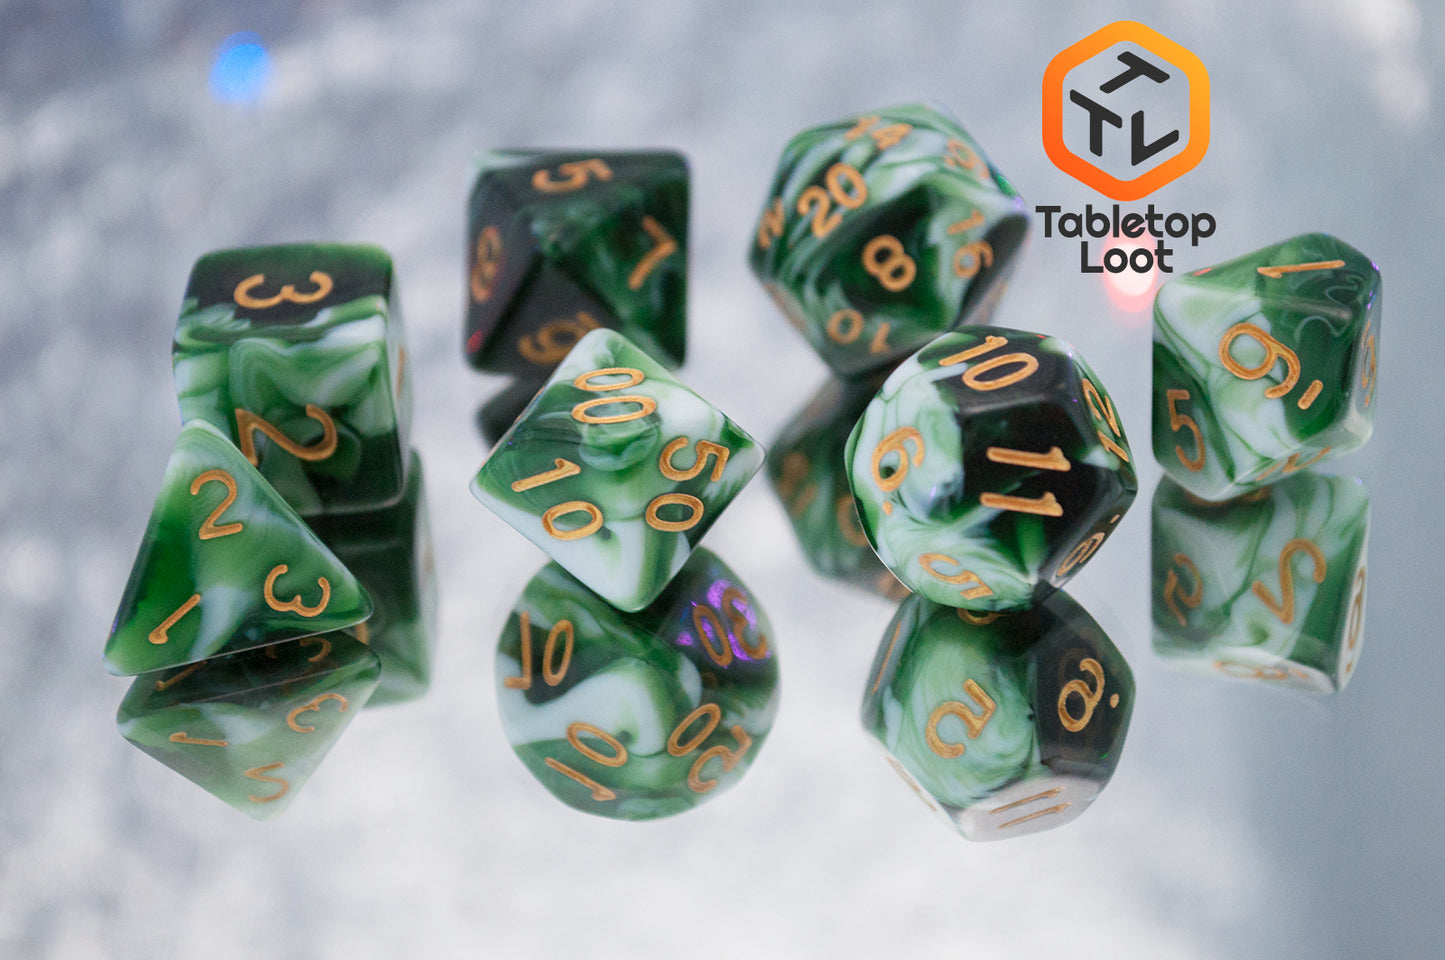 The Jadeite Cabbage 7 piece dice set from Tabletop Loot with swirls of shades of green and white, numbered in gold.